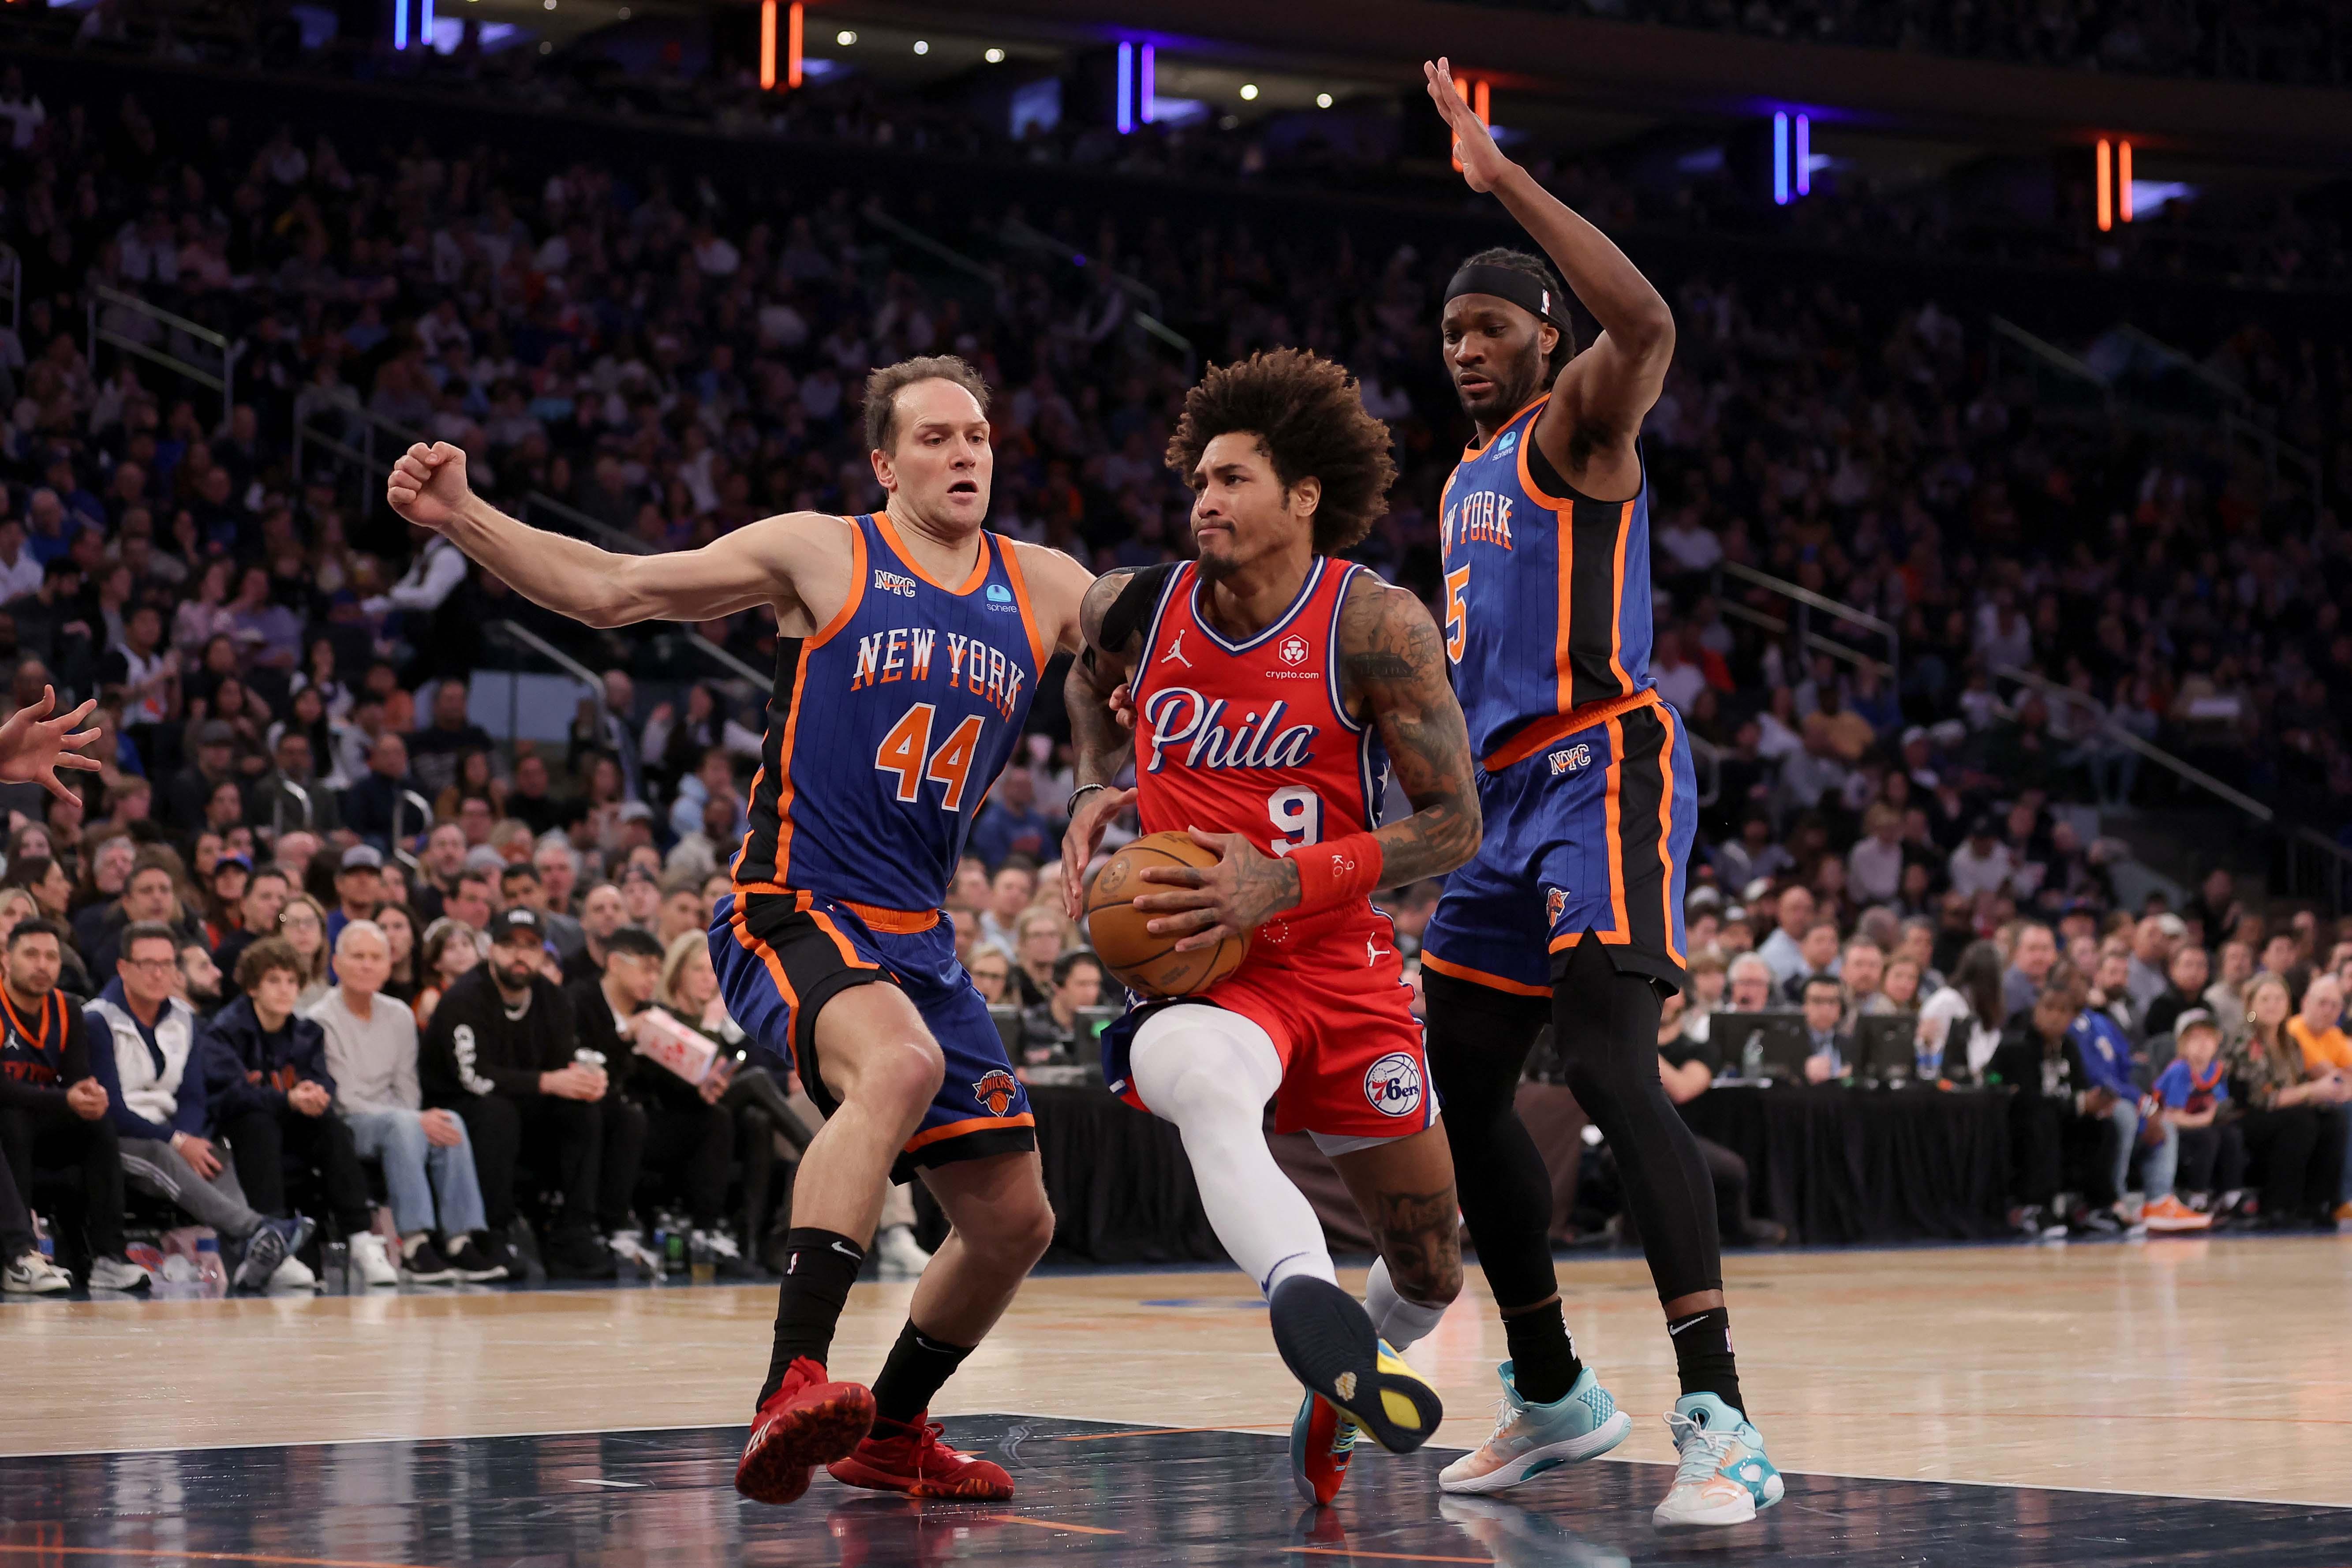 76ers vs. Knicks: How to watch online, live stream info, game time